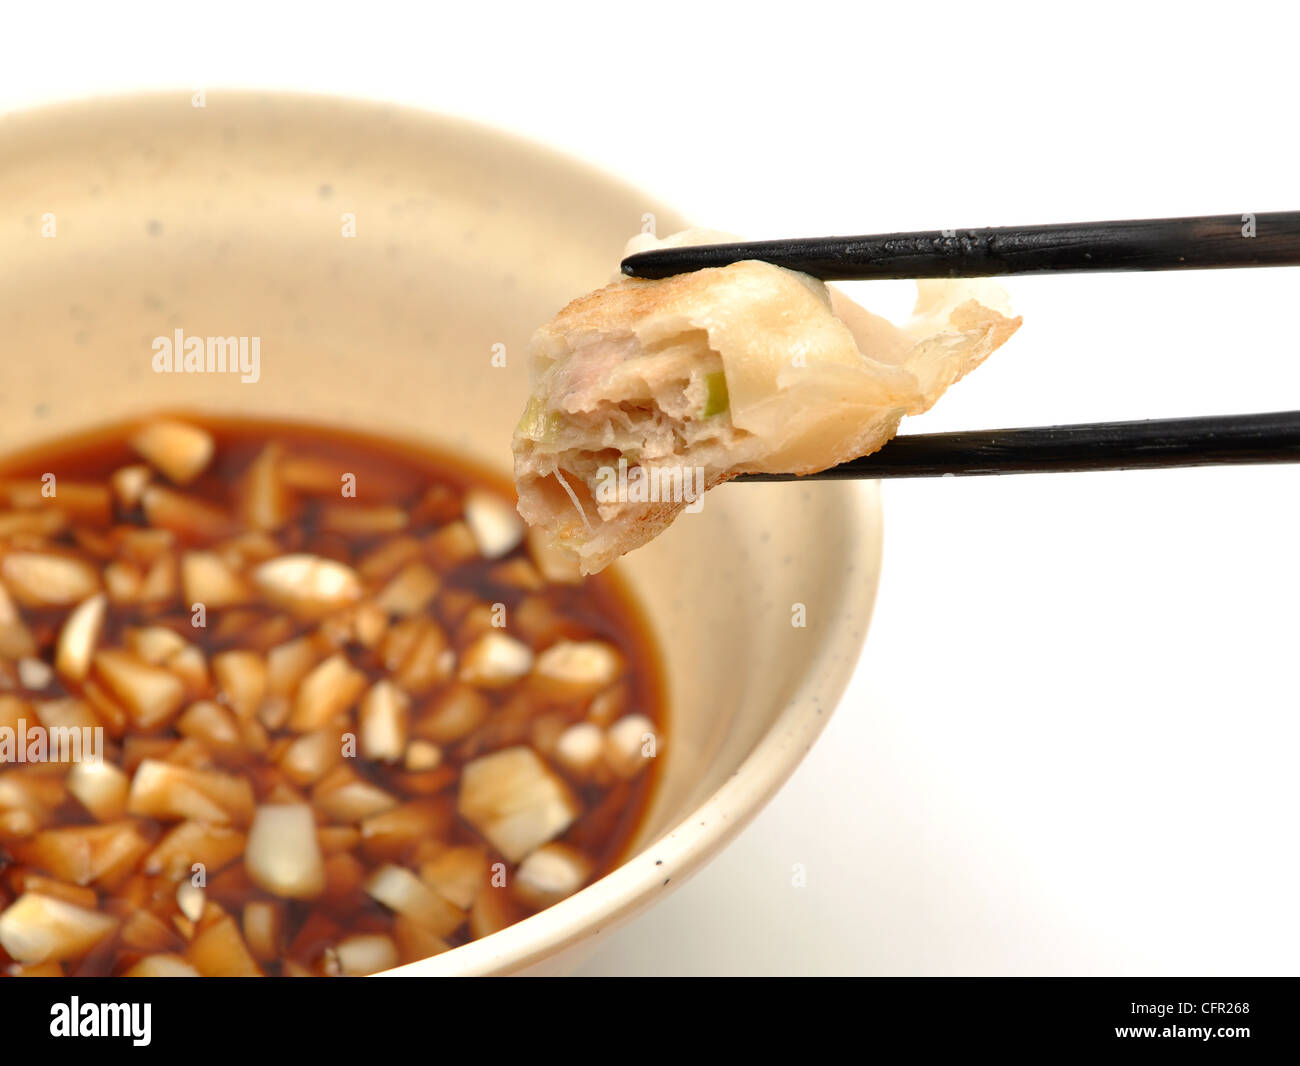 Eating fired chinese dumpling Stock Photo